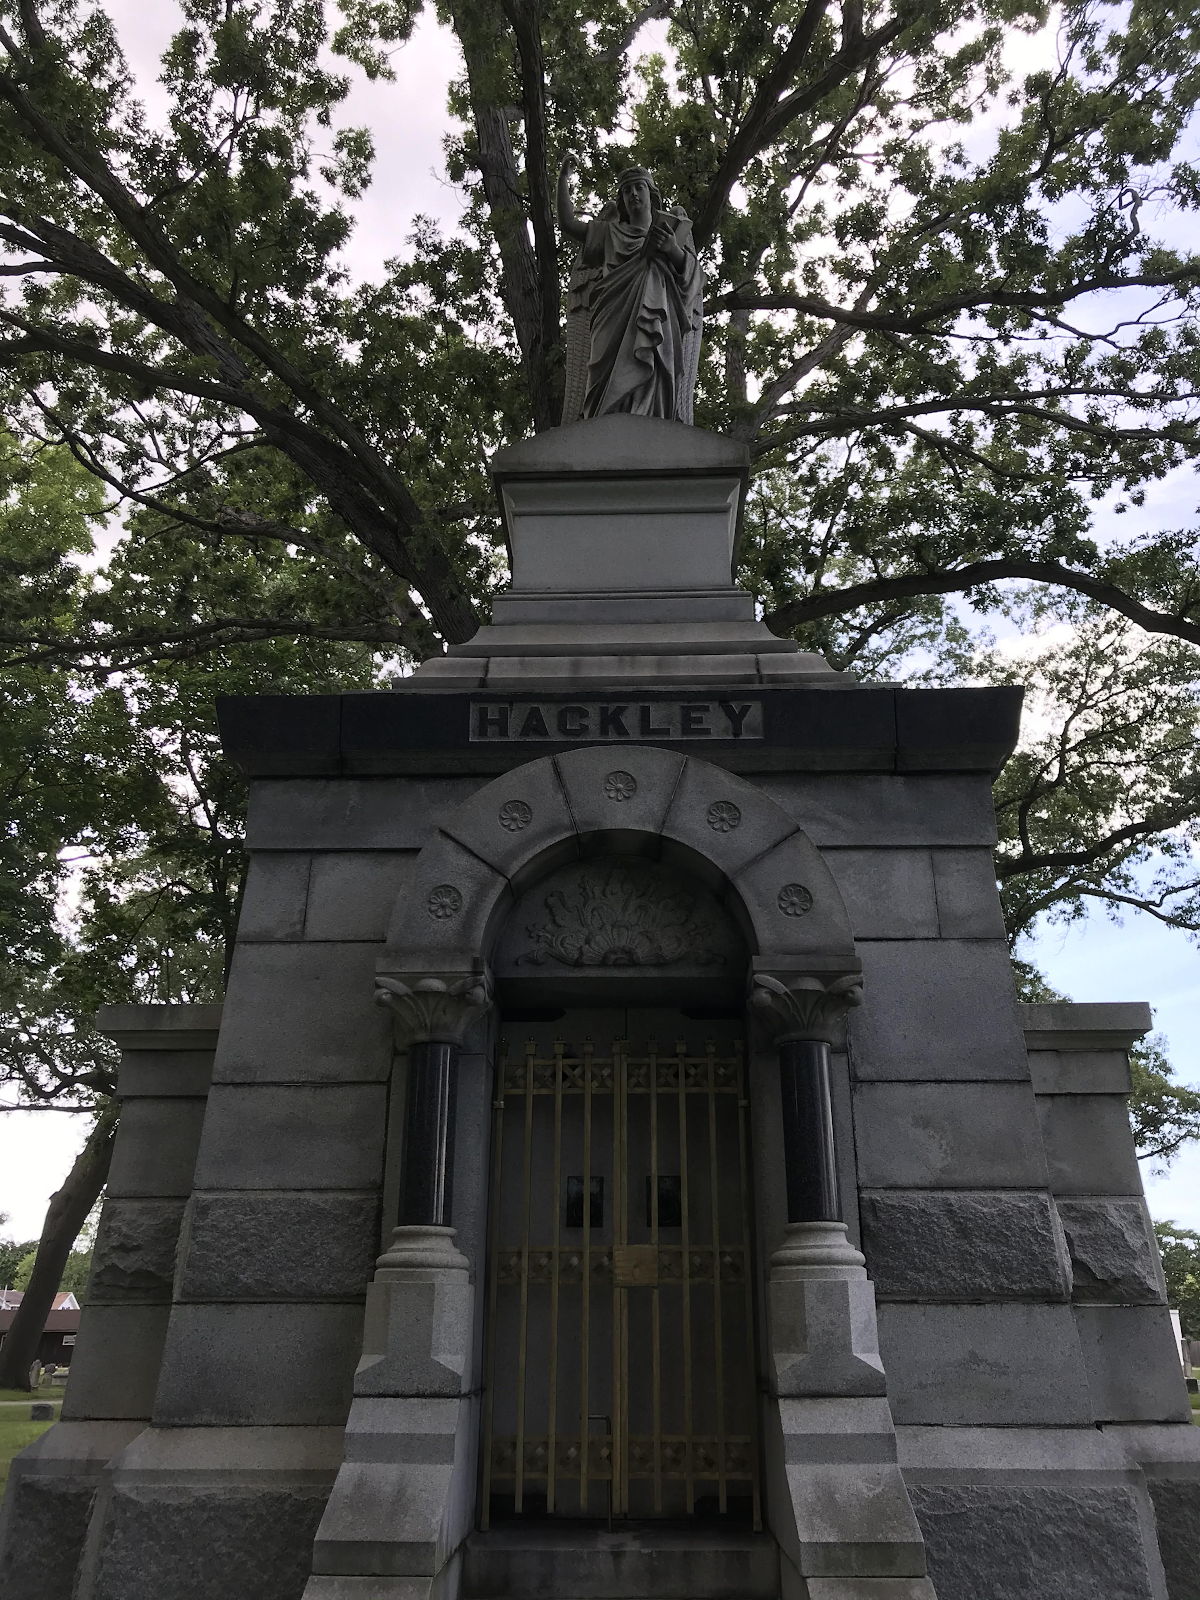 Hackley mousoleum with statue holding book at top, flower details, and columns.